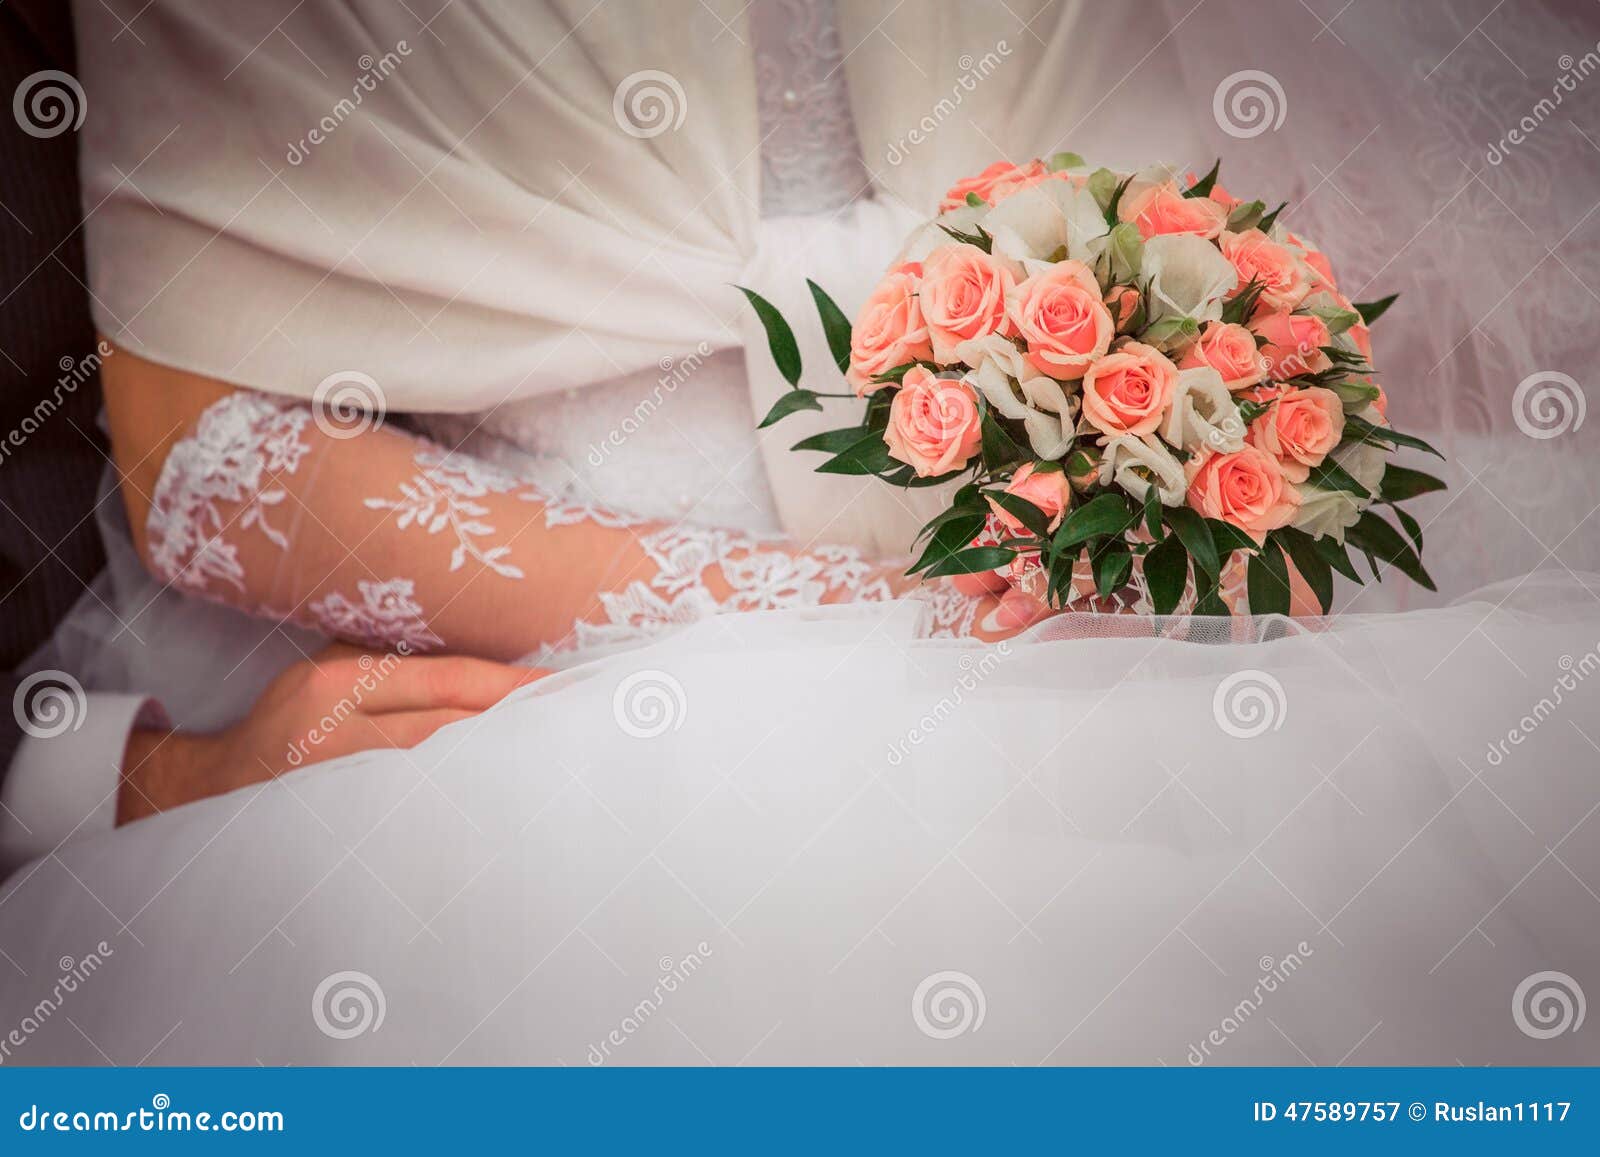 He Put the Wedding Ring on Her Stock Image - Image of husband, culture ...